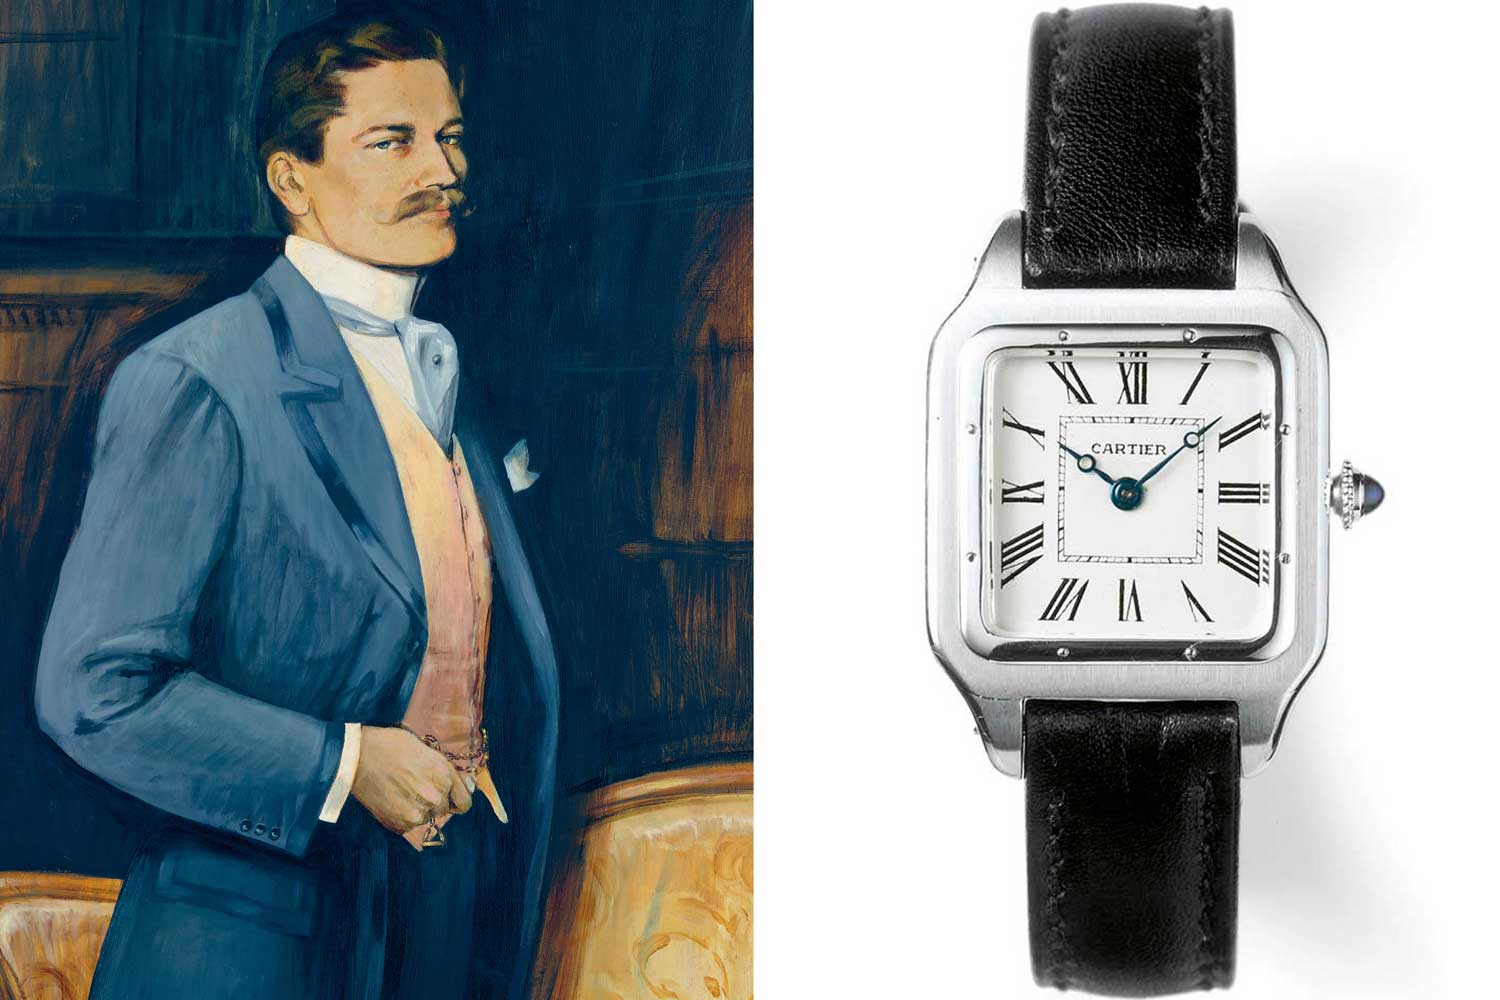 Above from left: The visionary behind the brand, Louis Cartier; A 1916 Santos-Dumont wristwatch, already exhibiting a strong geometry that would only become more pronounced with the Tank